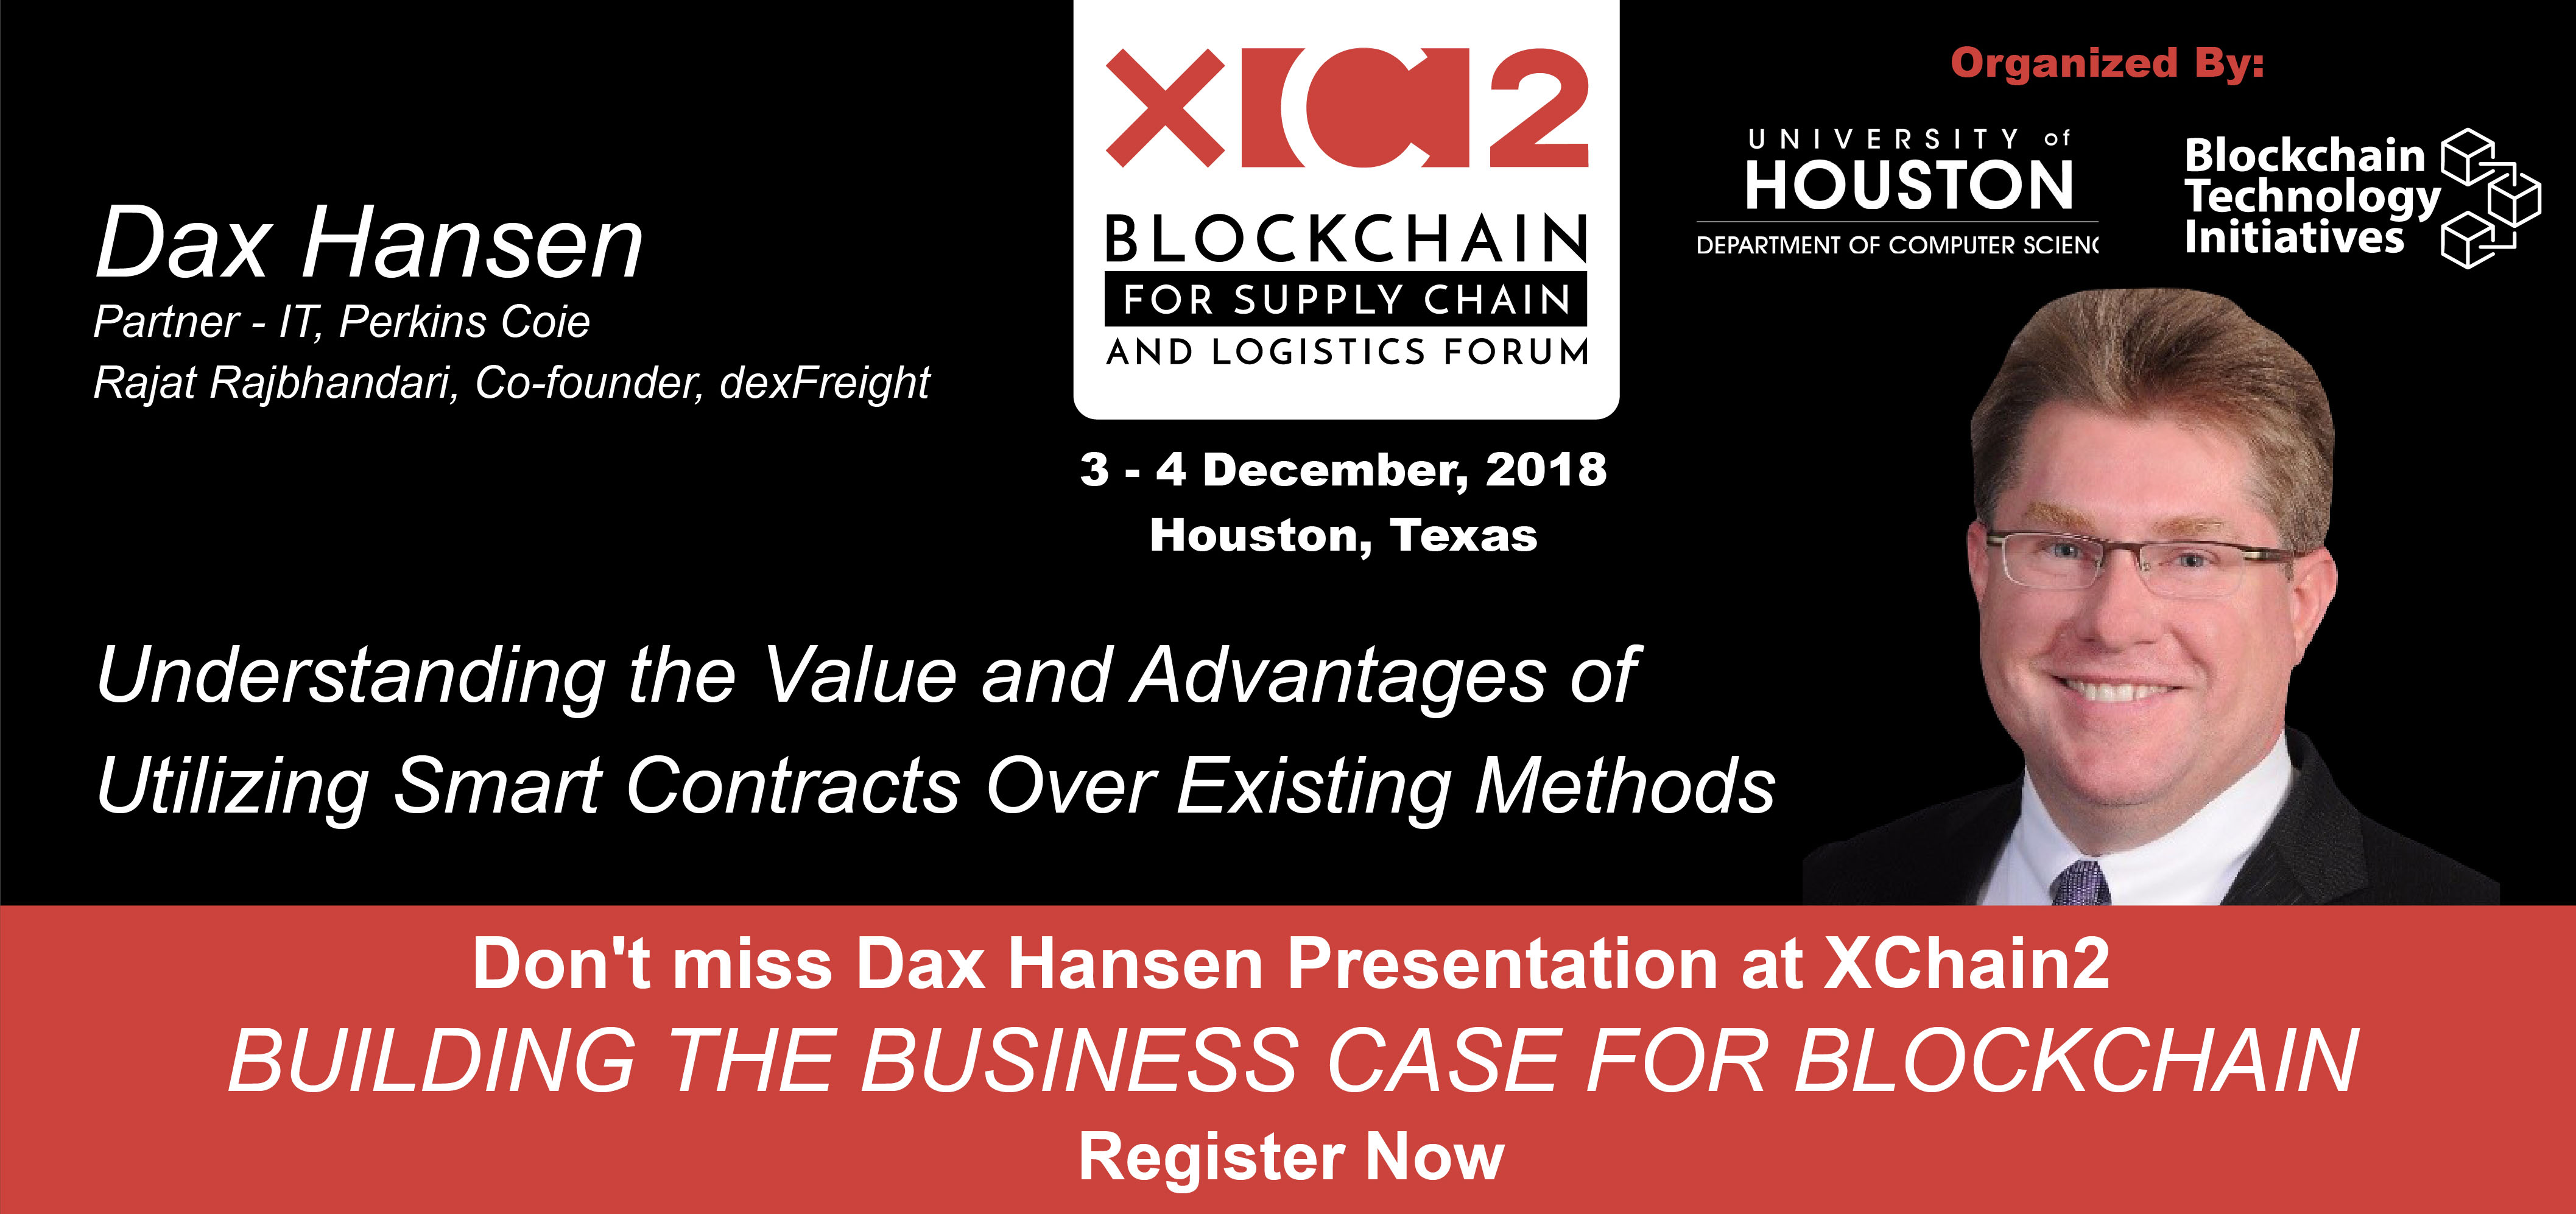 Come hear Dax Hansen talk about smart contracts at XChain2.